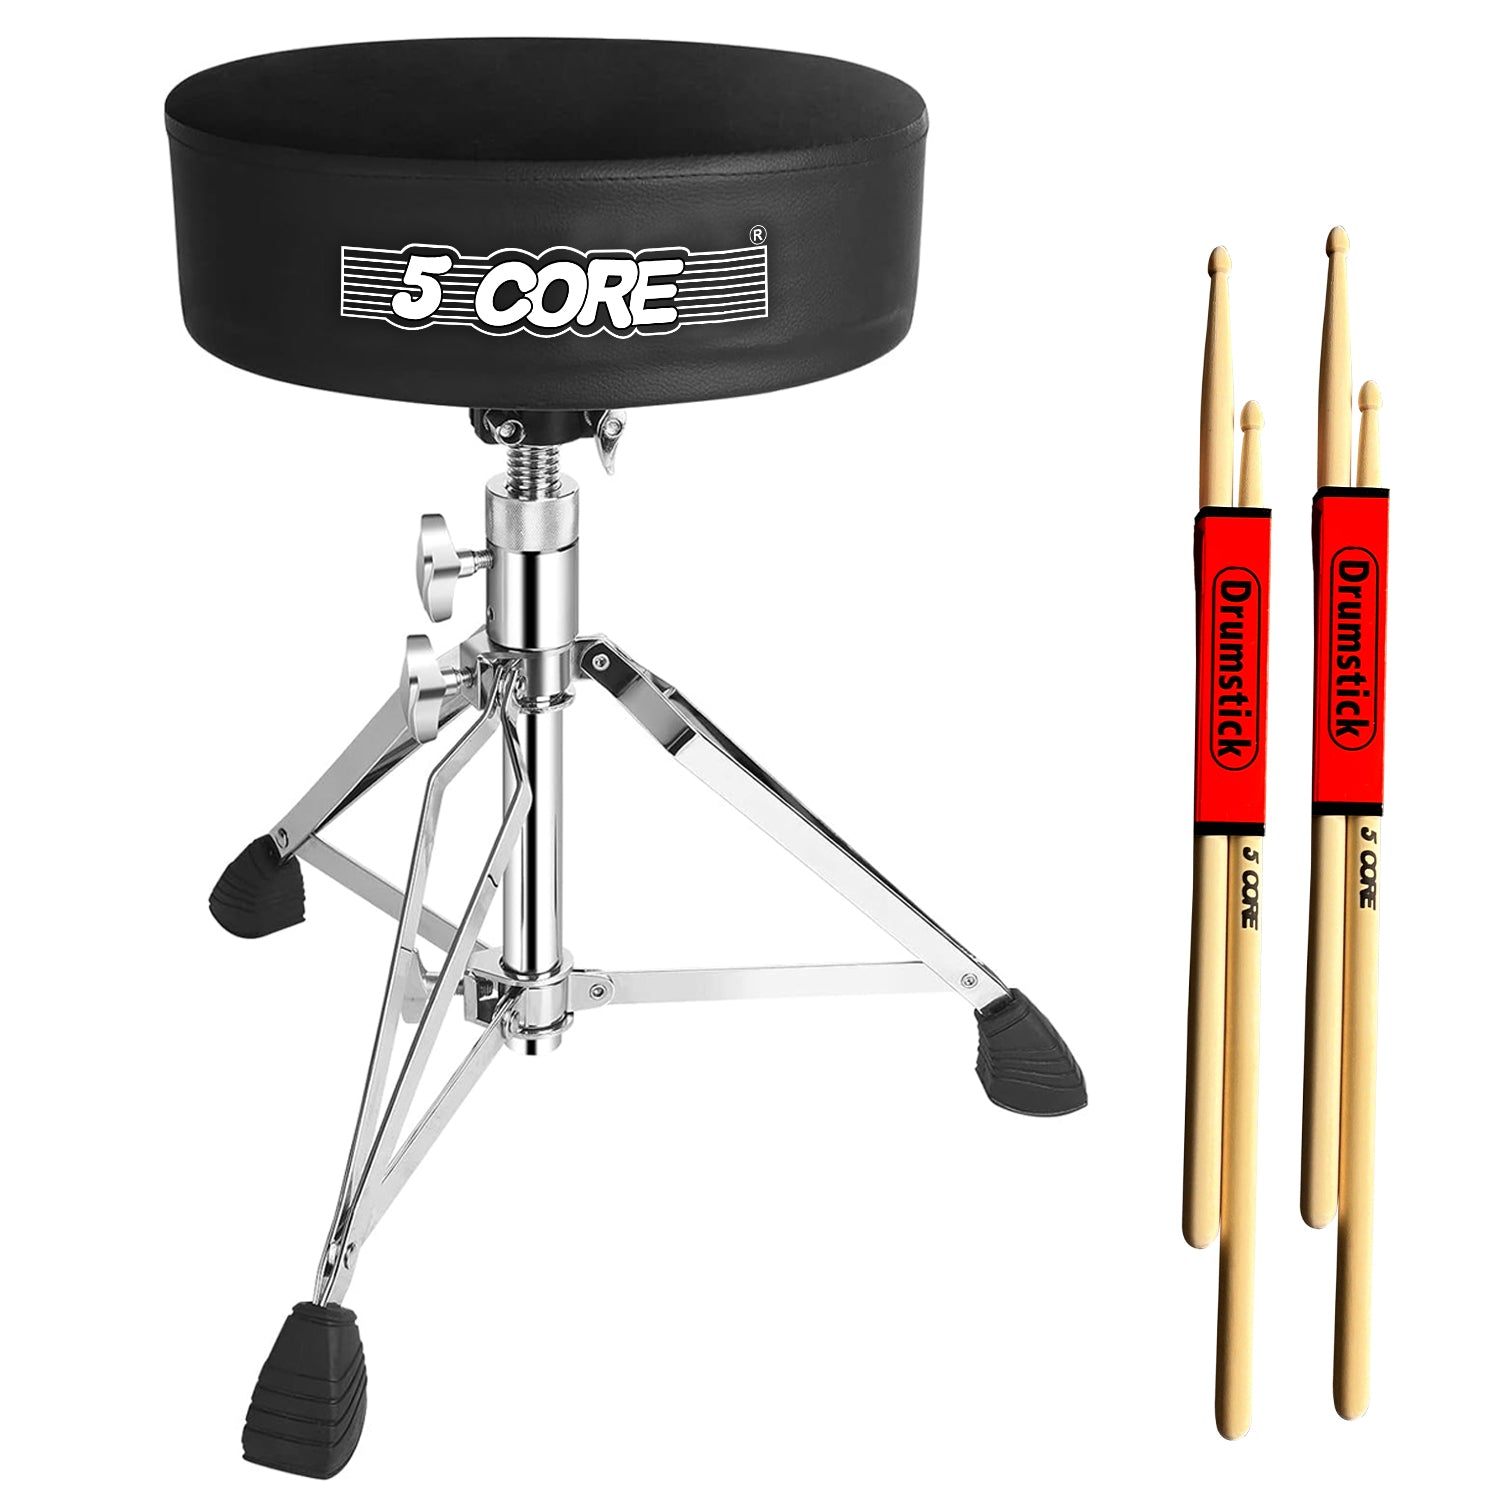 5 Core Drum Throne: Height adjustable, comfortable padded stool ideal for drummers.